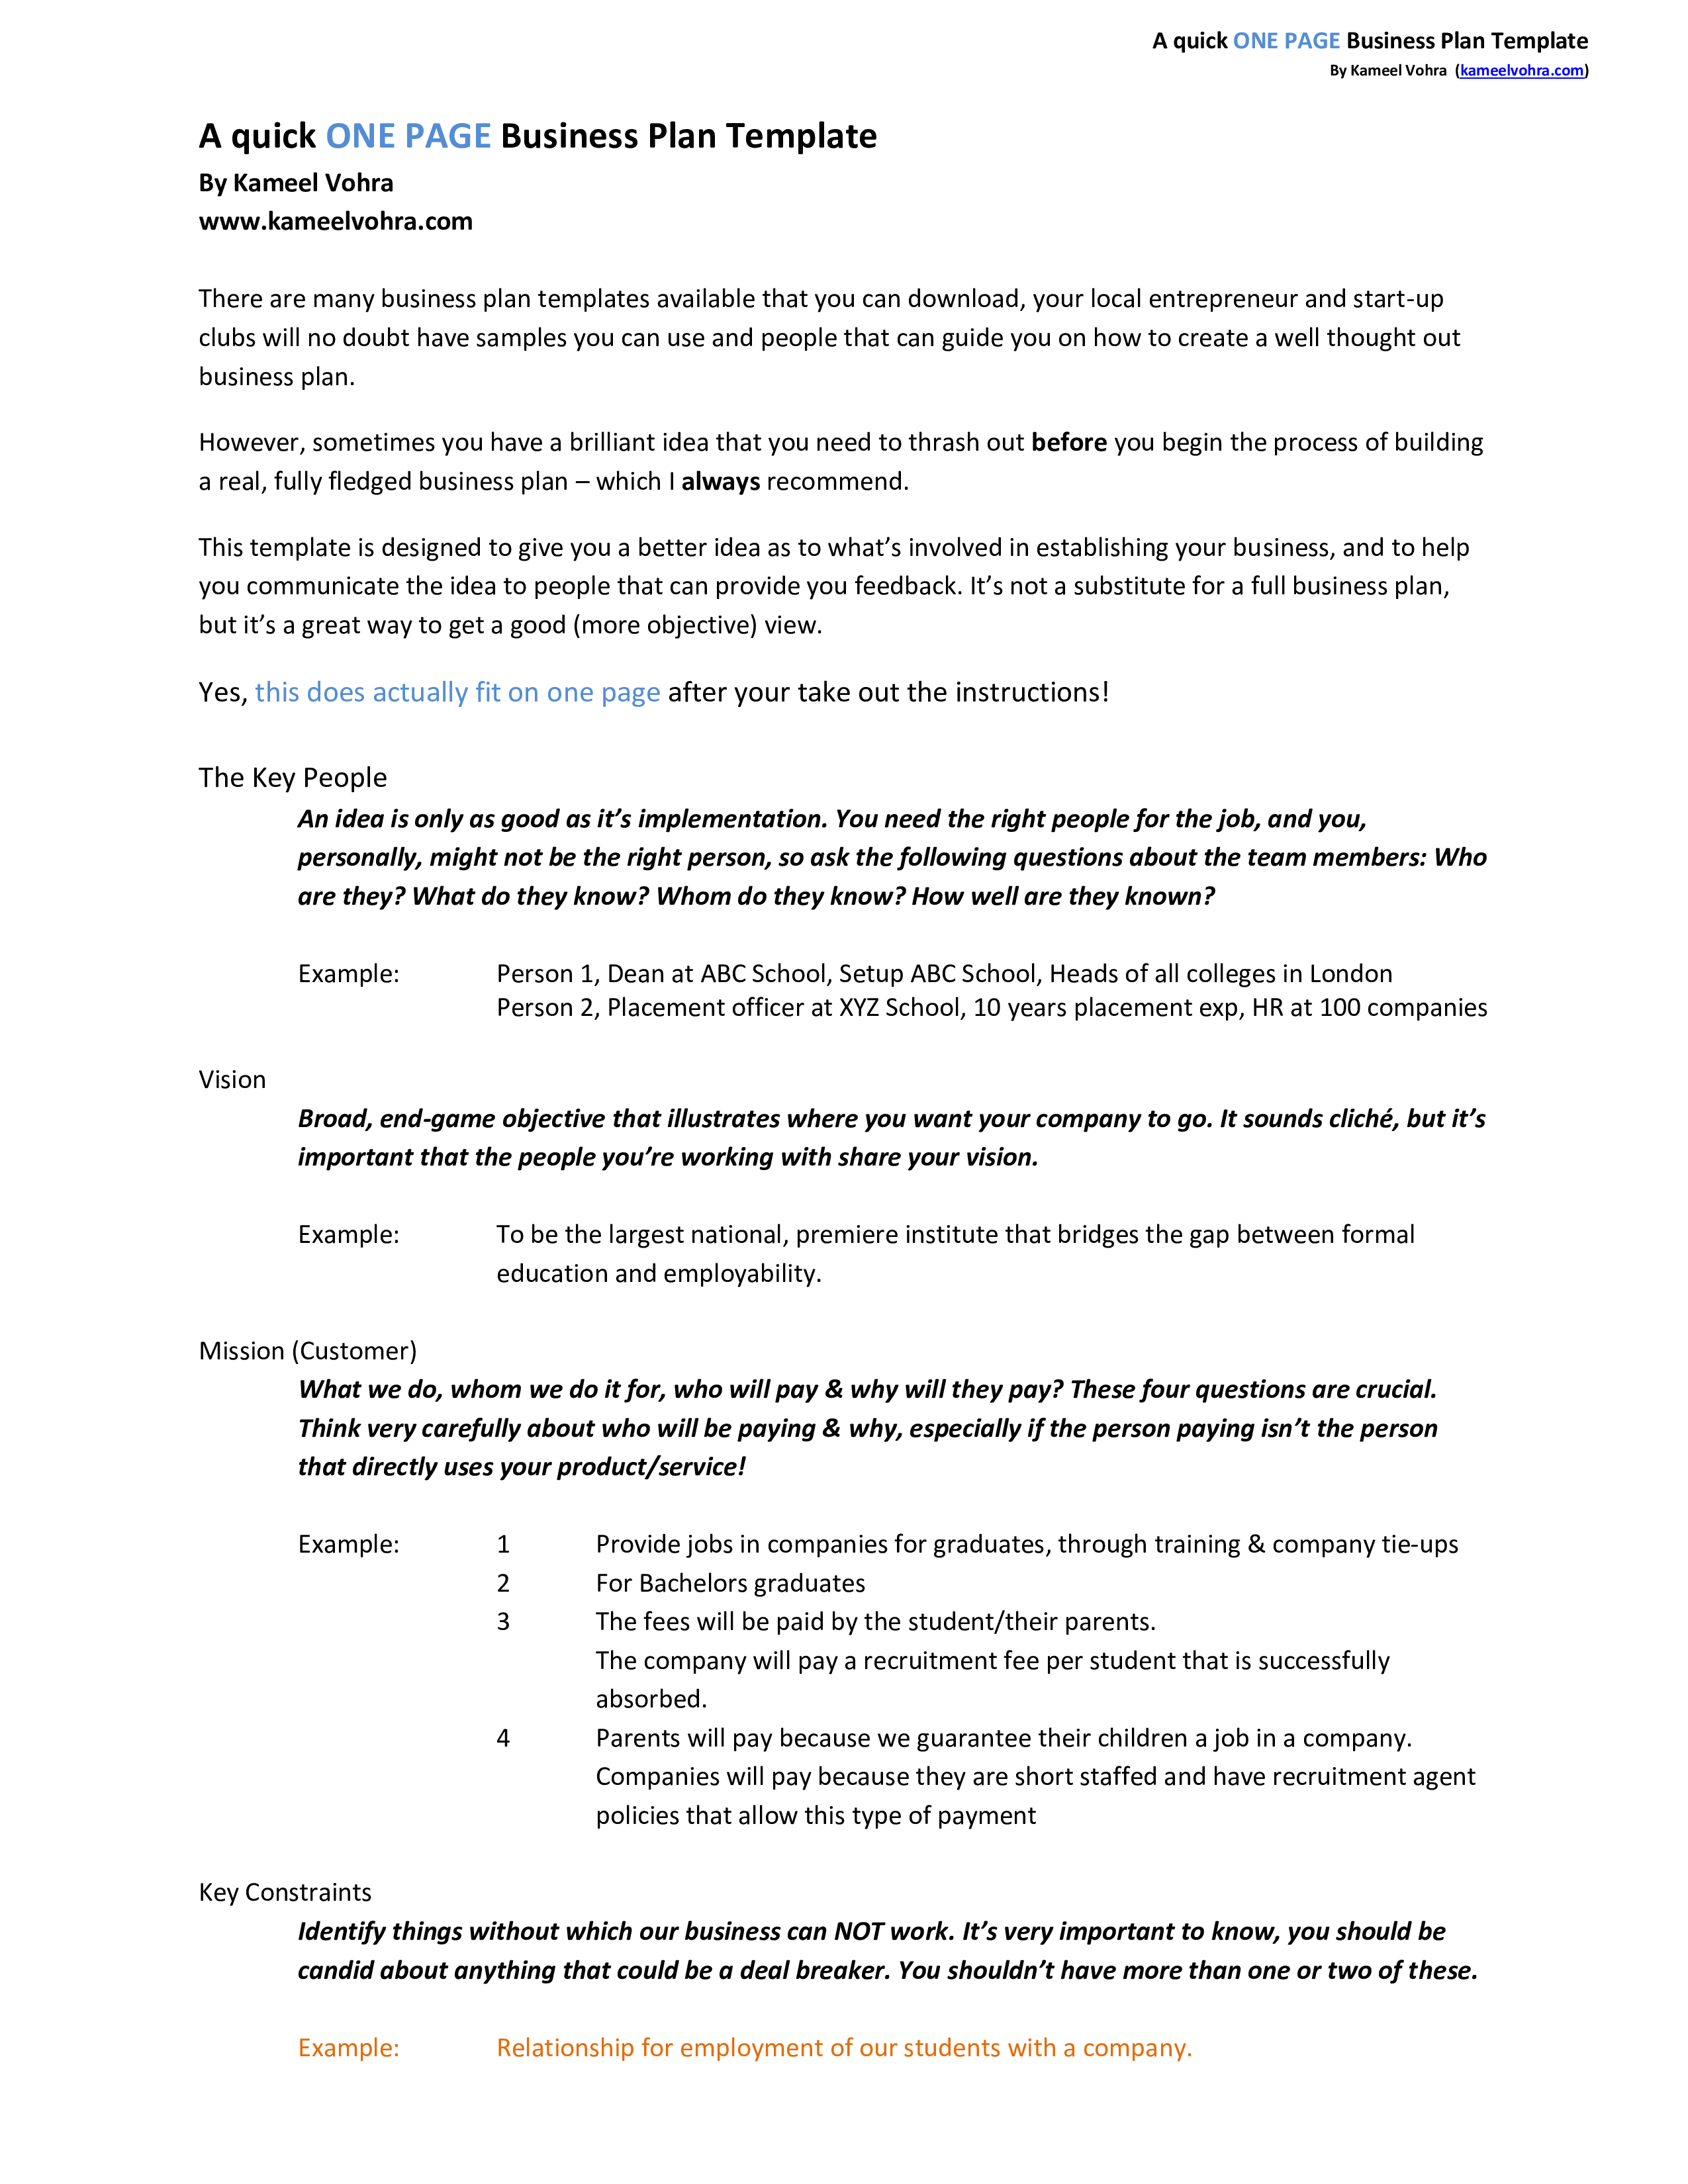 A Quick One Page Business Plan Template - Eloquens Pertaining To Brewery Business Plan Template Free